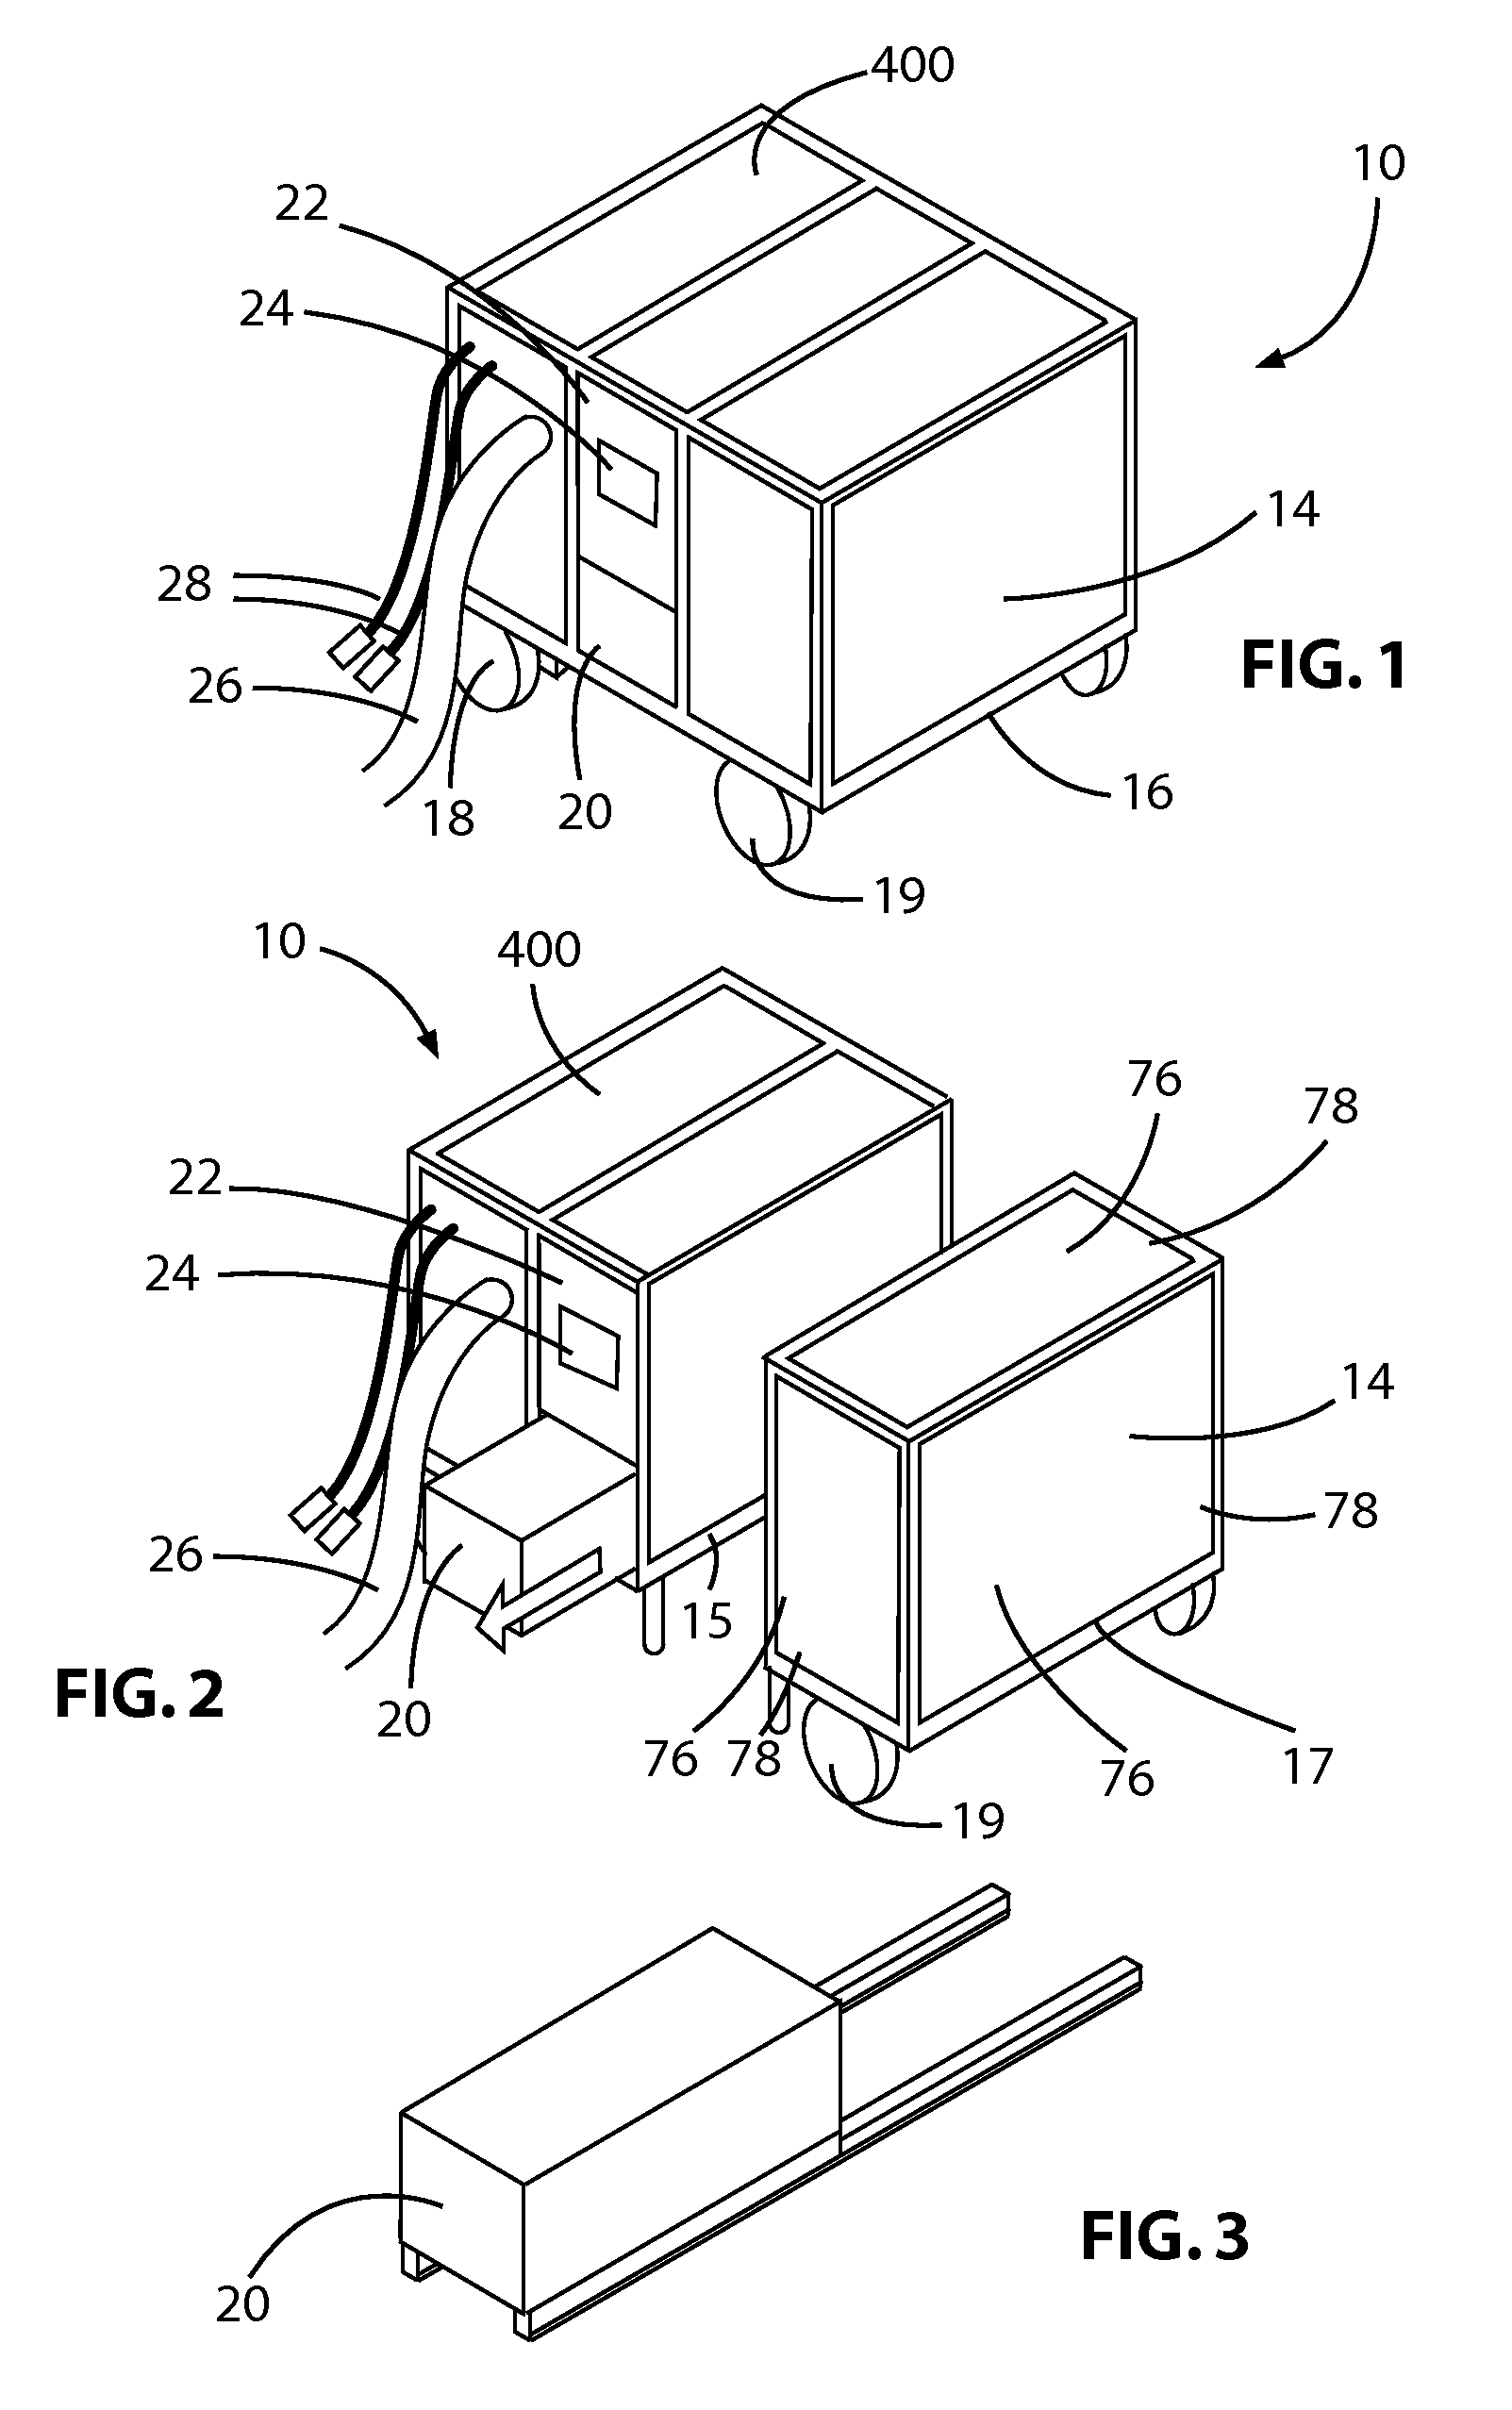 System of fasteners for attaching panels onto modules that are to be installed on an airplane ground support equipment cart